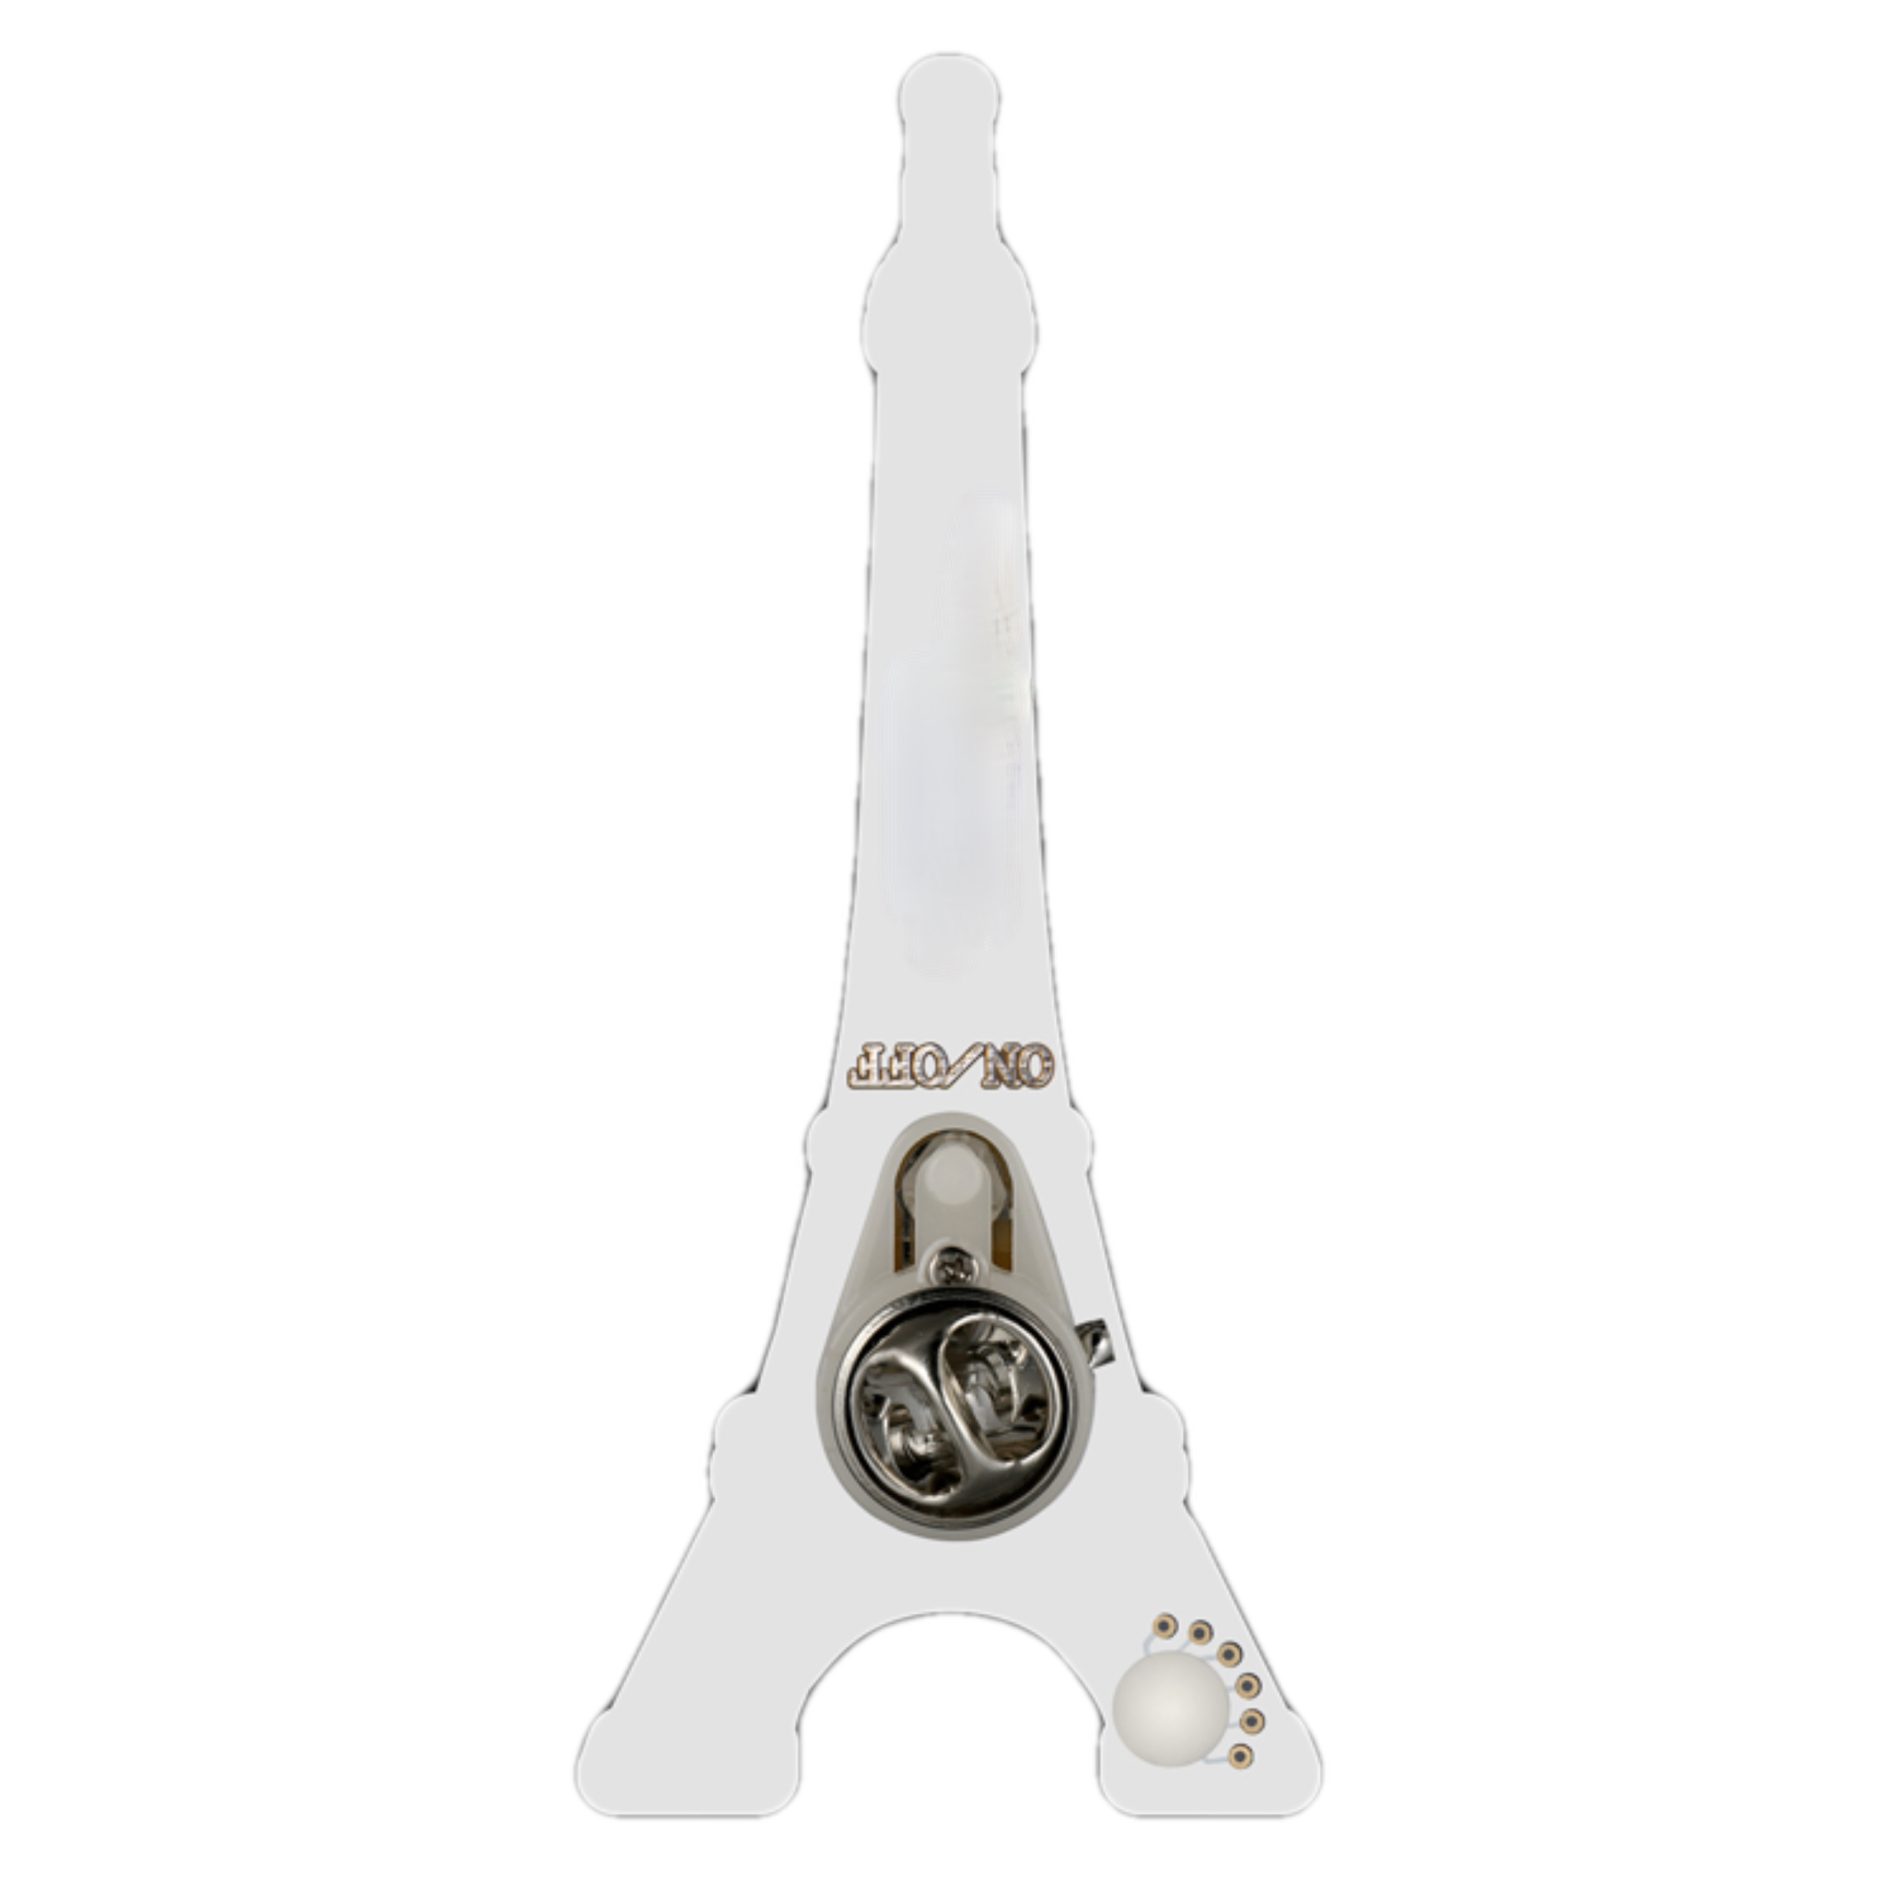 Eiffel Tower Flashing Body Light Lapel Pins All Body Lights and Blinkees 4